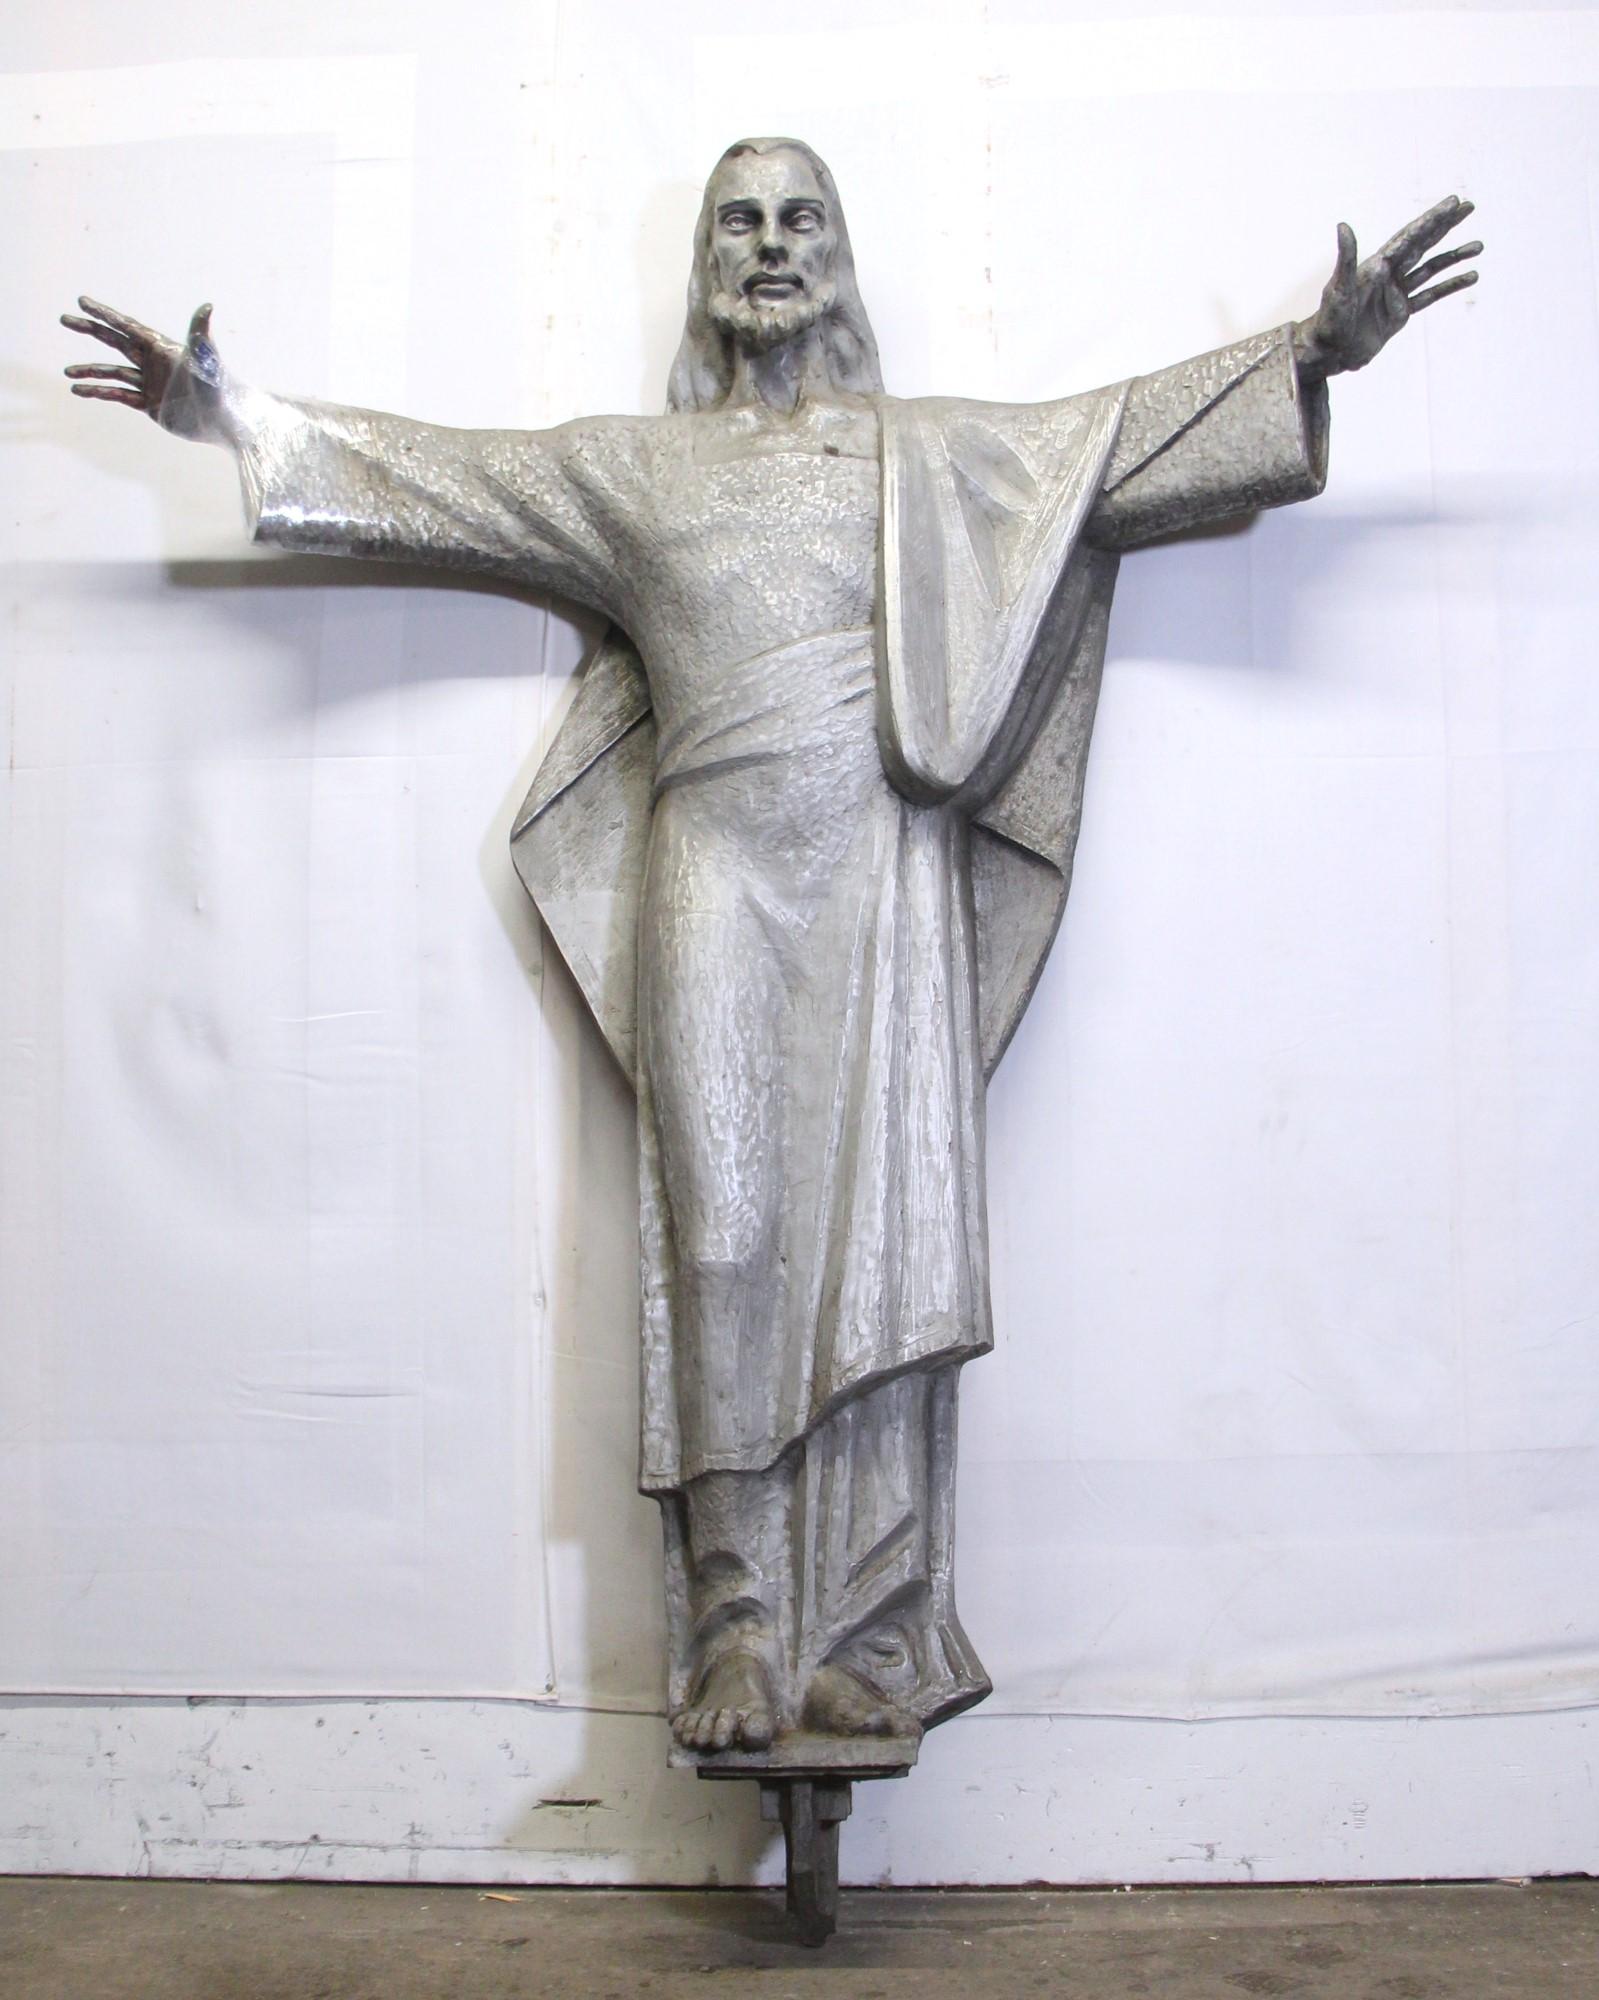 Highly detailed cast aluminum with a zinc finish from 1958. This statue was retrieved from an exterior courtyard of The Norwegian Lutheran Church in Brooklyn. Please note, this item is located in our Scranton, PA location.